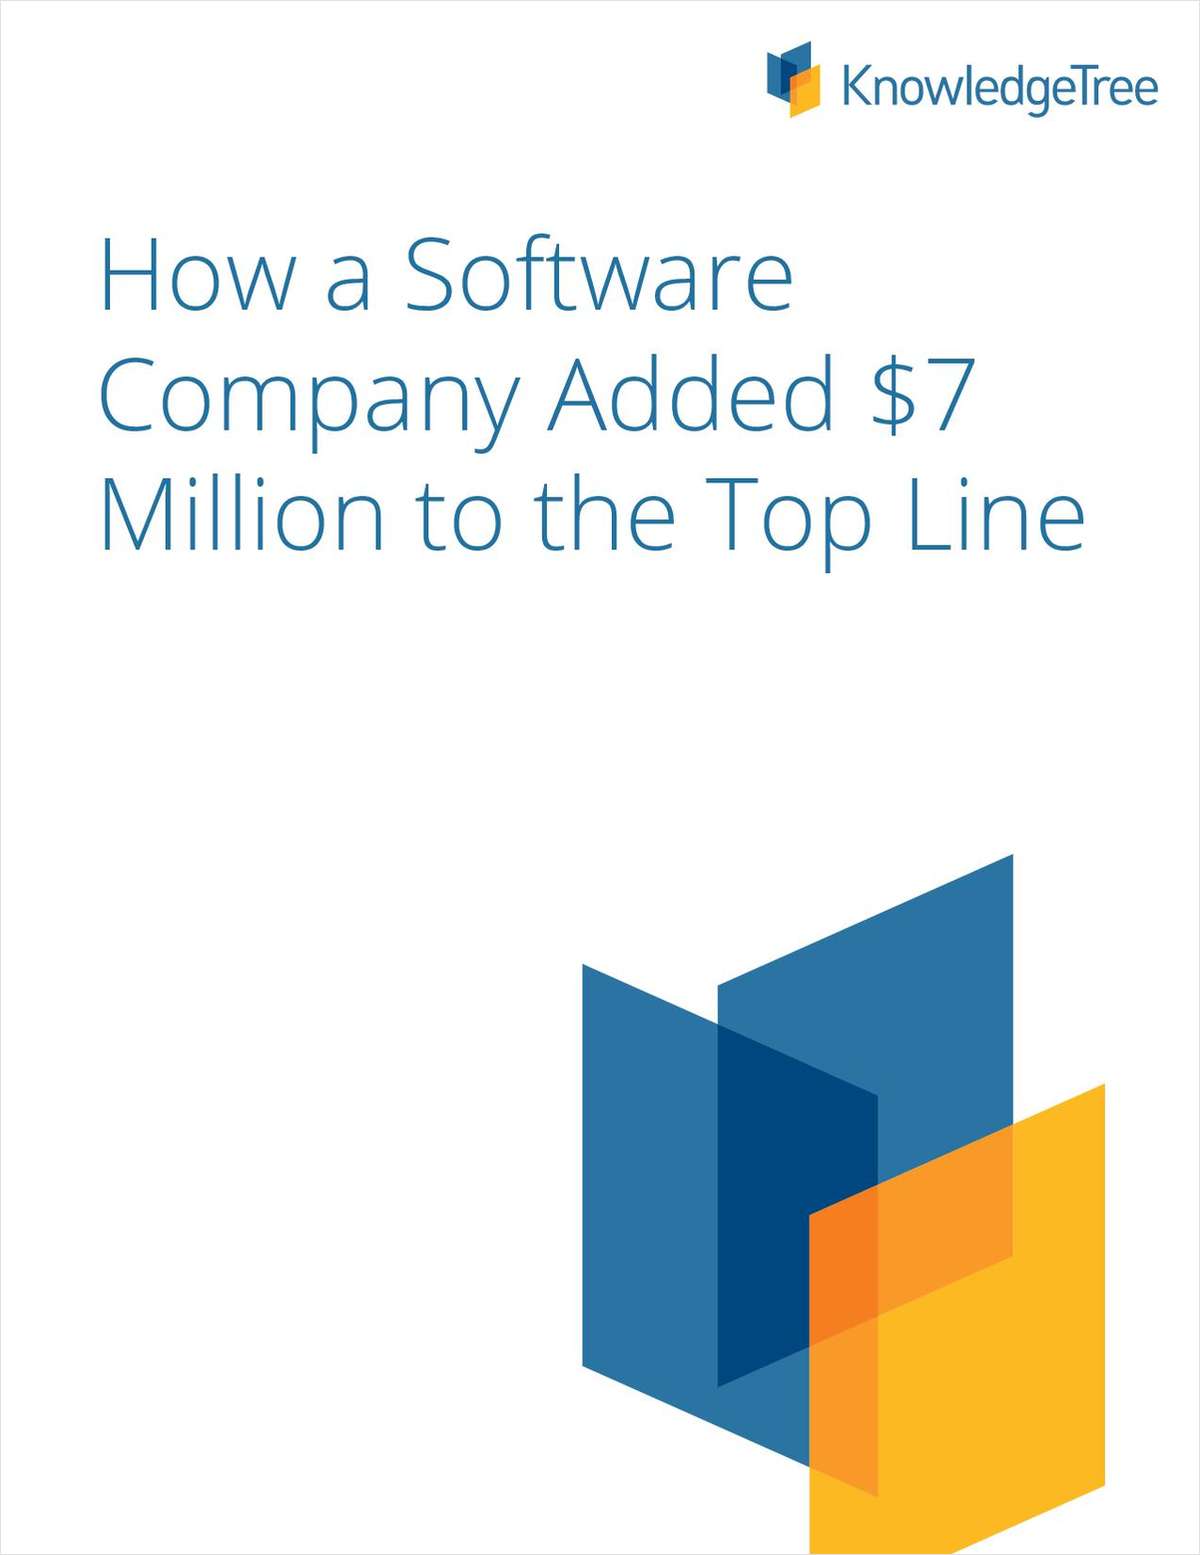 How a Software Company Added $7 Million to the Top Line